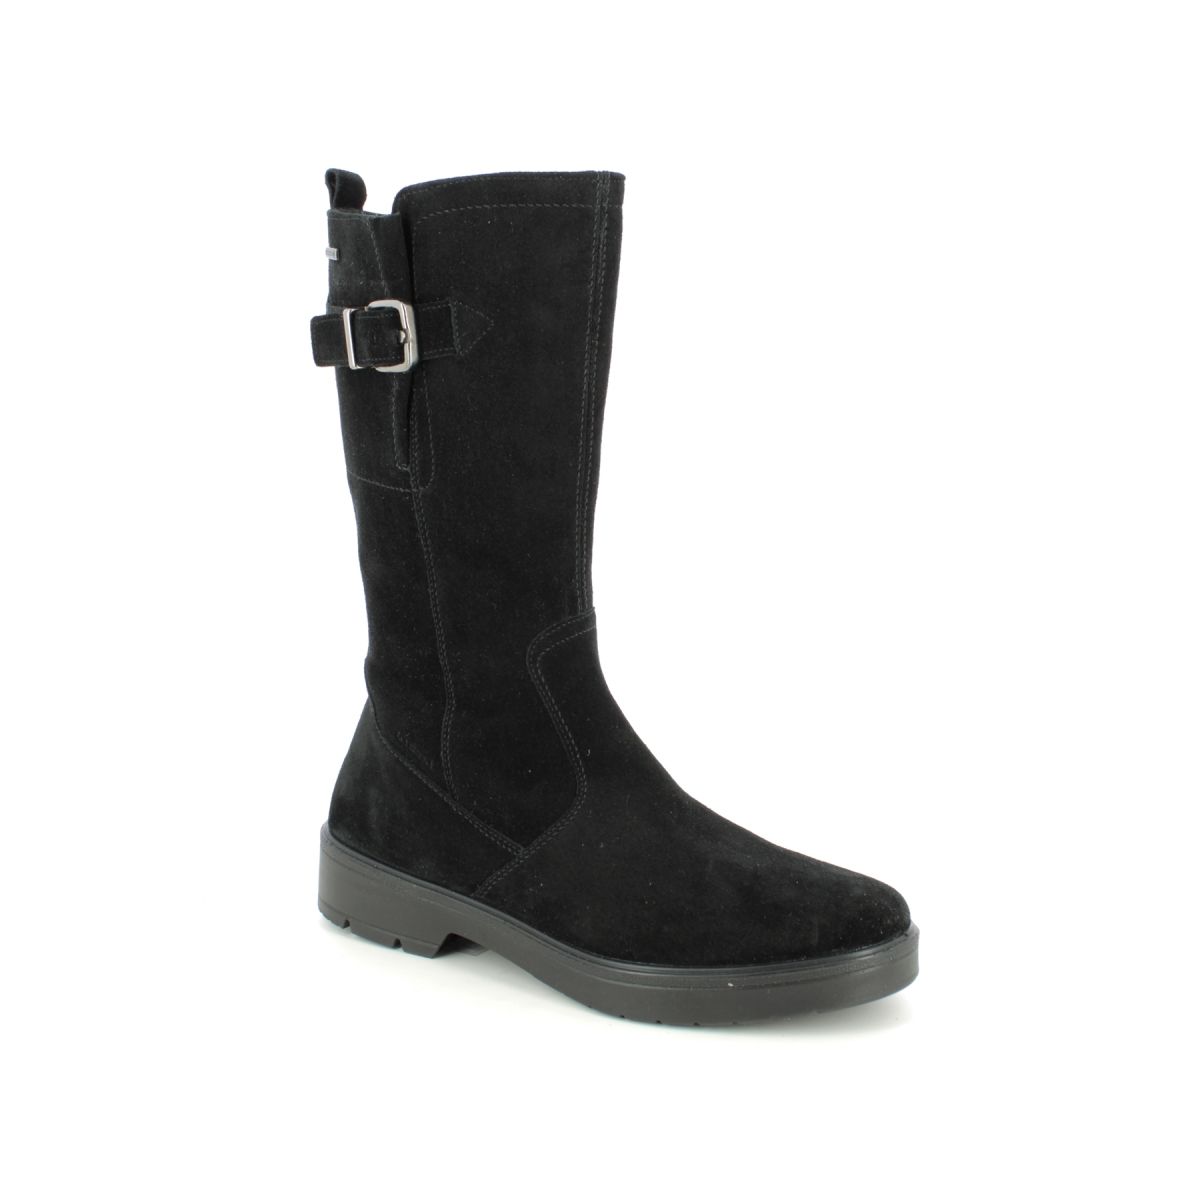 Legero Mystic Mid Gtx Black Suede Womens Mid Calf Boots 2000196-0000 In Size 9 In Plain Black Suede